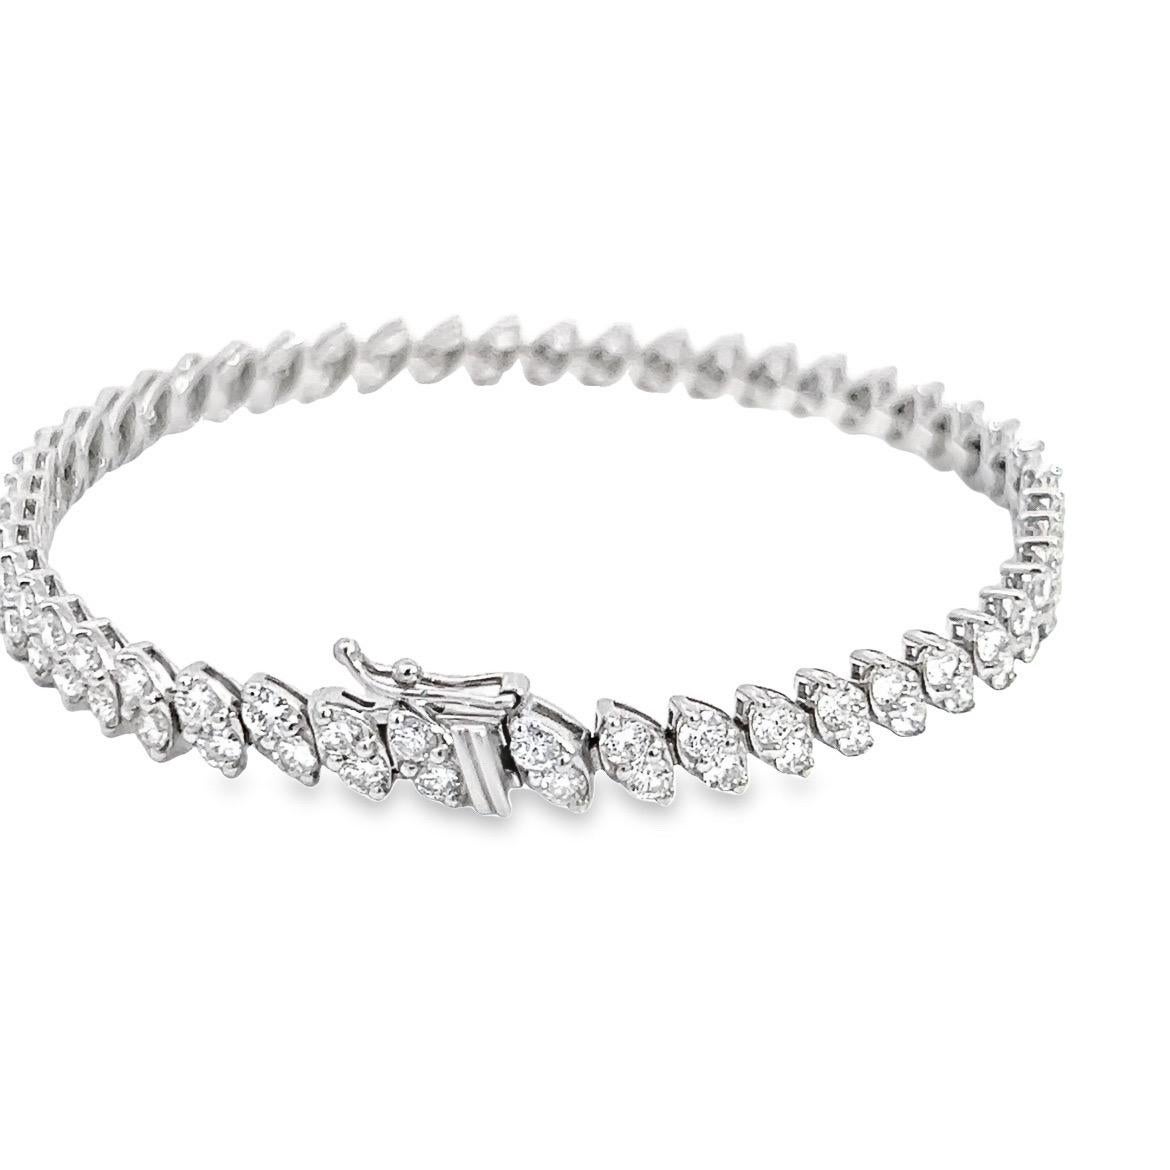 Diamond Fashion Bracelet in 14k White Gold with Natural Full Cut Diamonds
14k White Gold
4.52 Total Carat Weight
Quality: G/H - VS
MADE IN USA
Fashion Bracelet to wear in any occasion